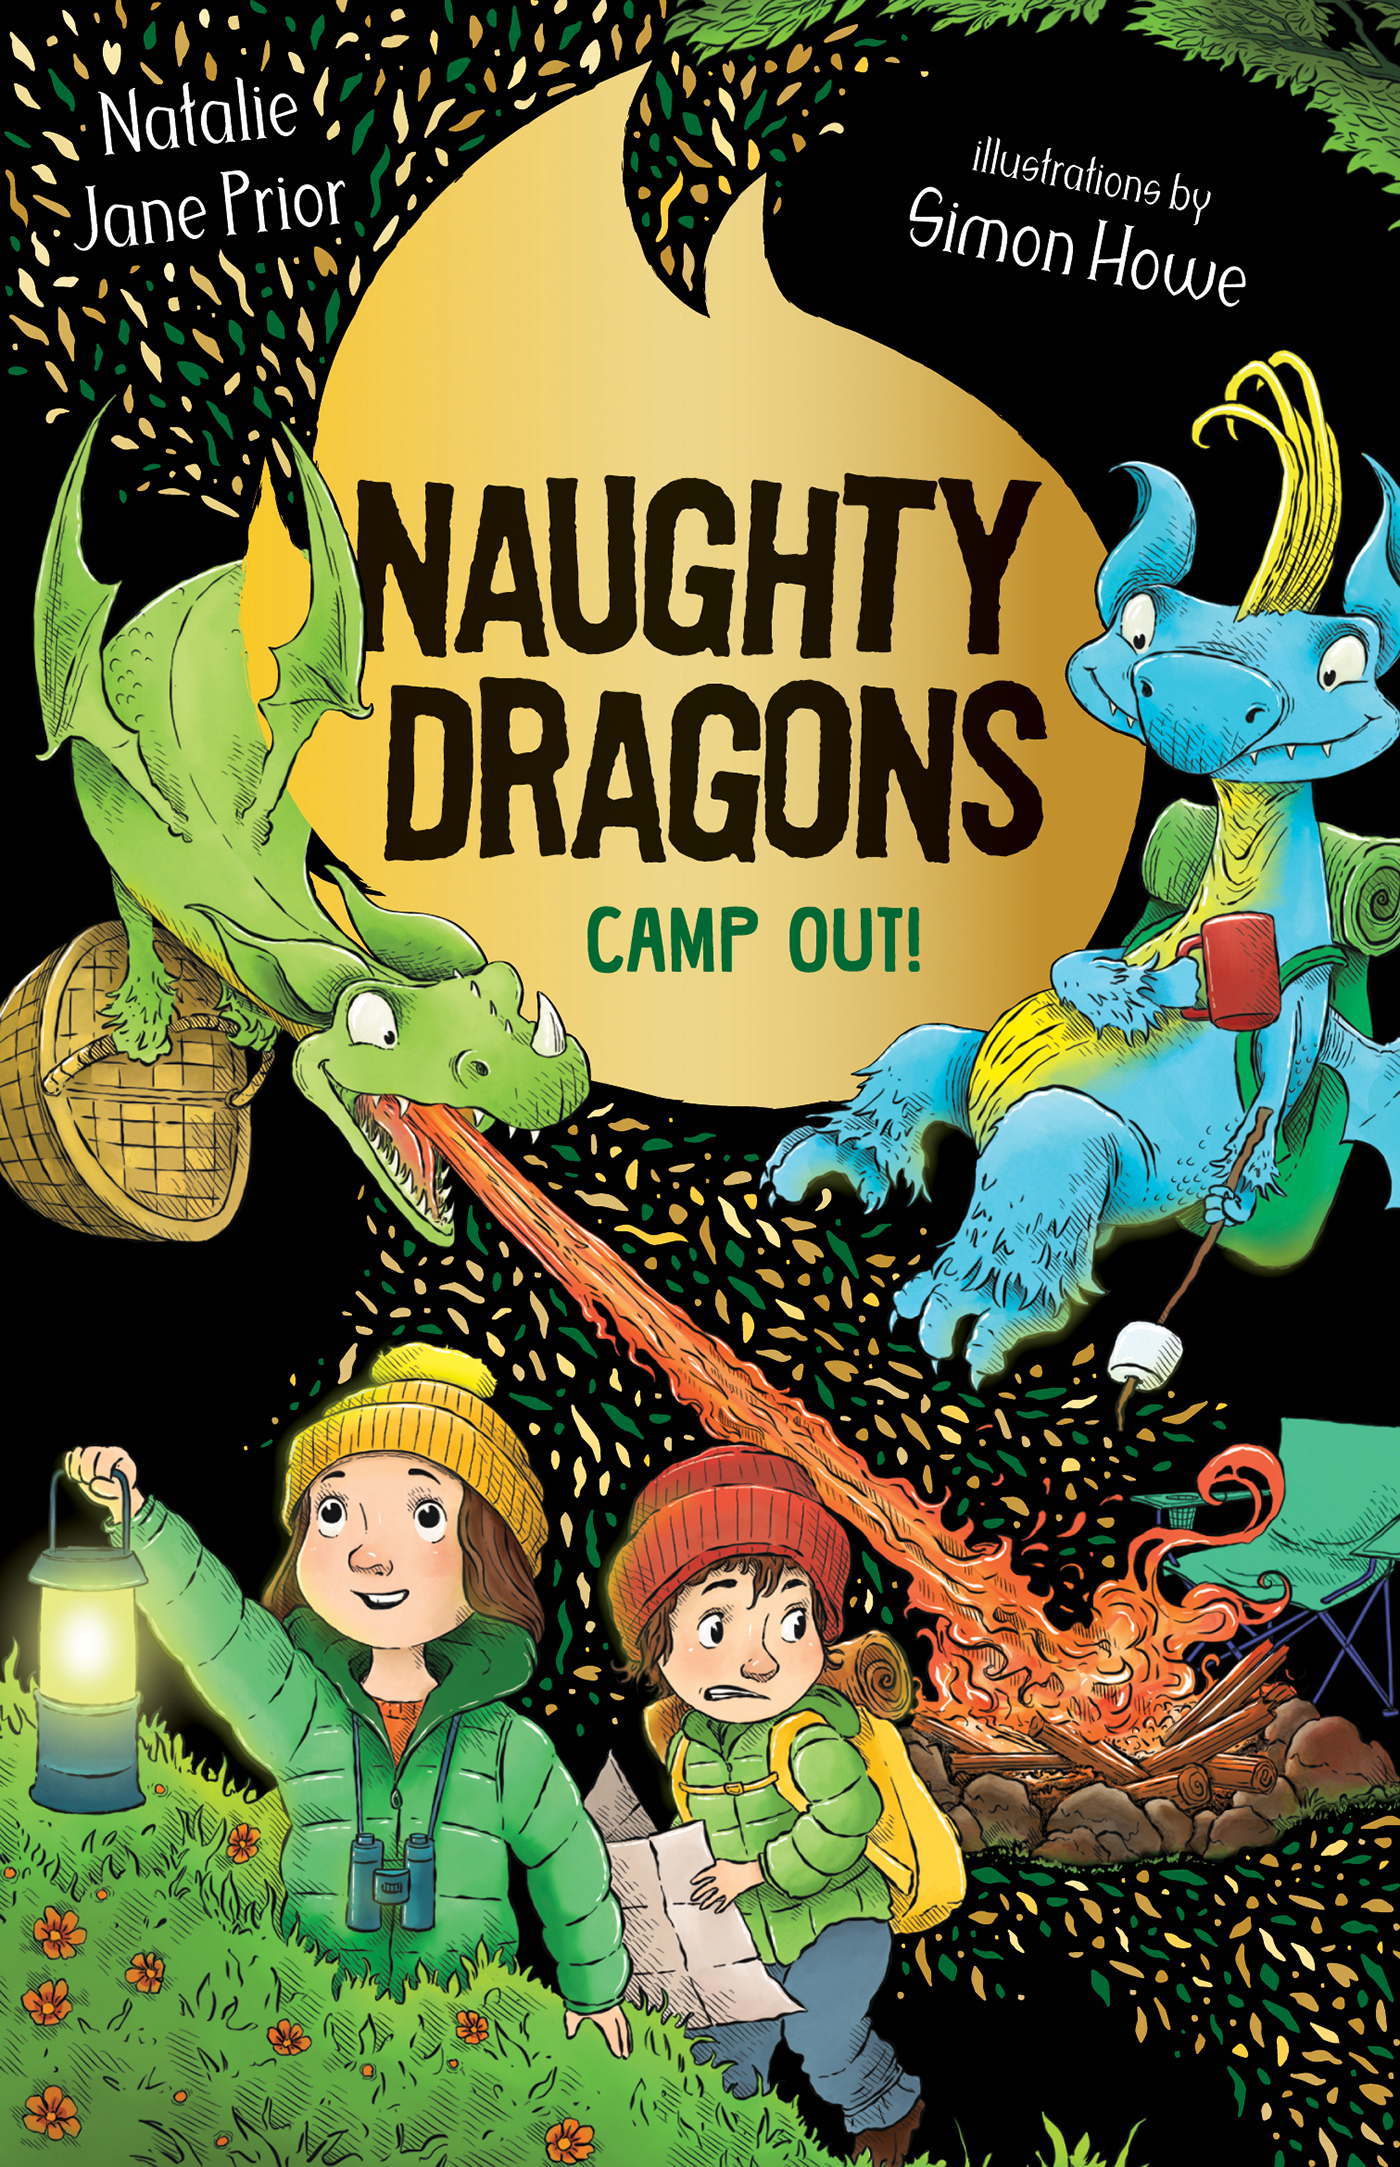 Naughty Dragons Camp Out!